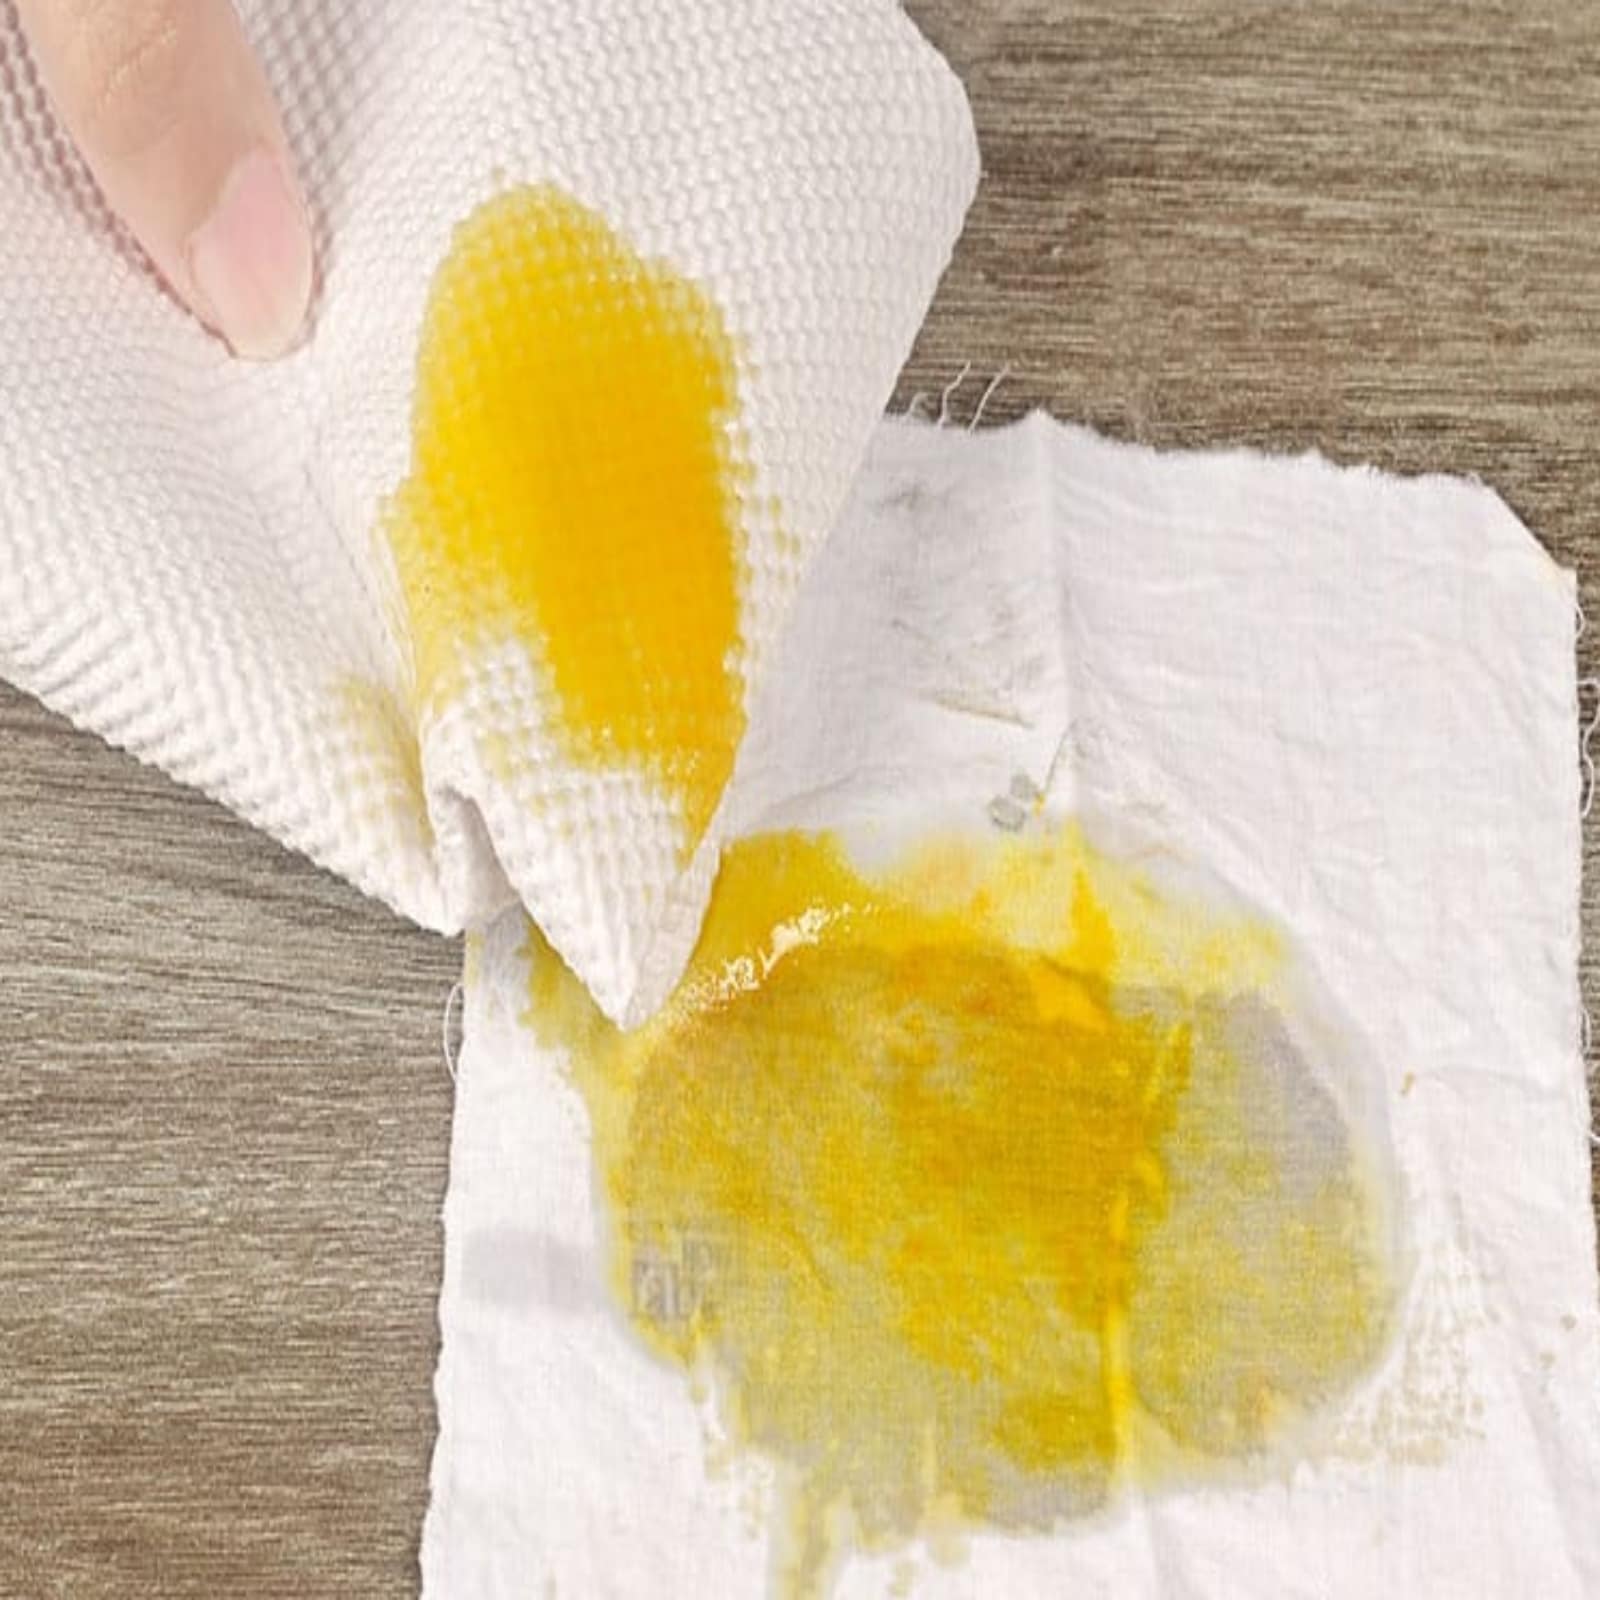 turmeric stain changes red from yellow